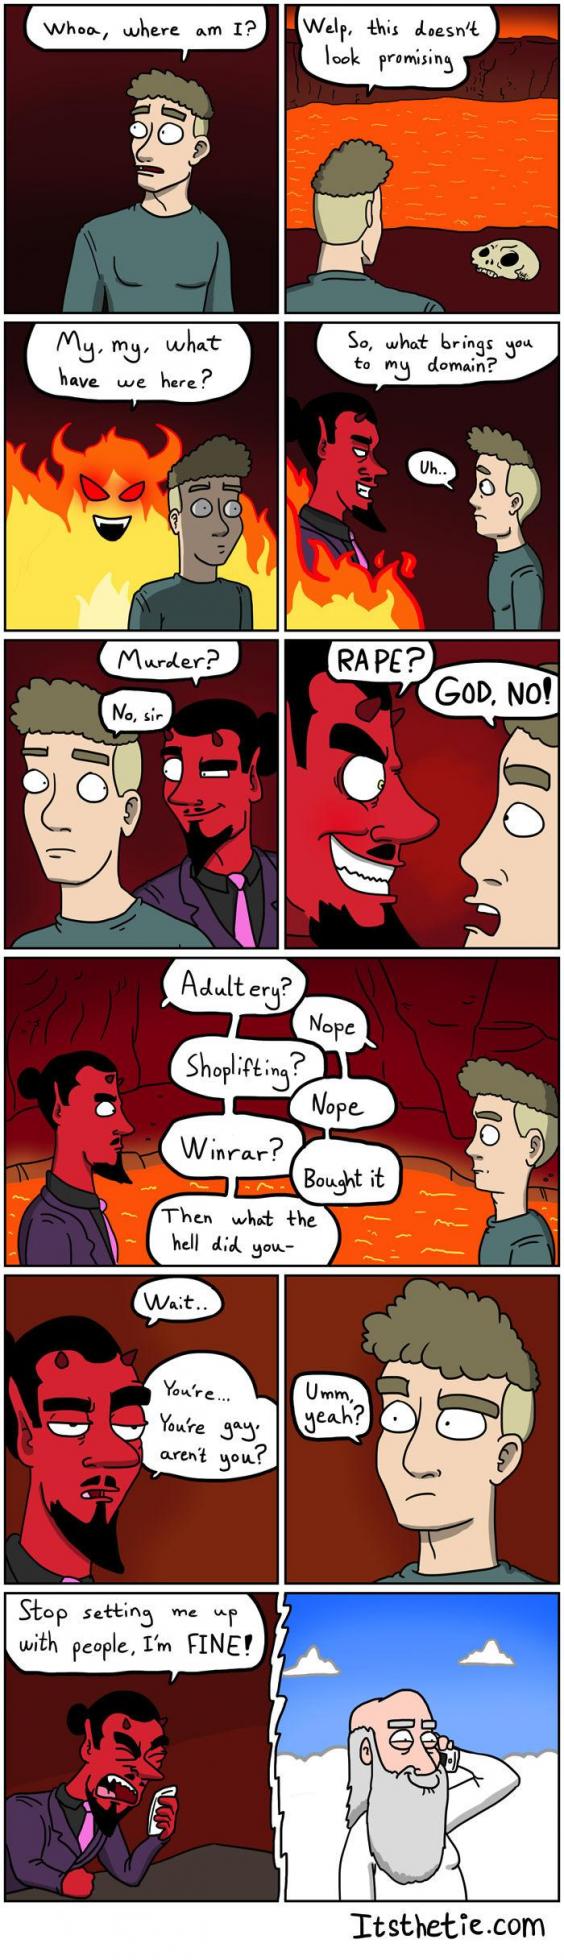 Comic Perfectly Ridicules Christian Stereotypes About Gay People